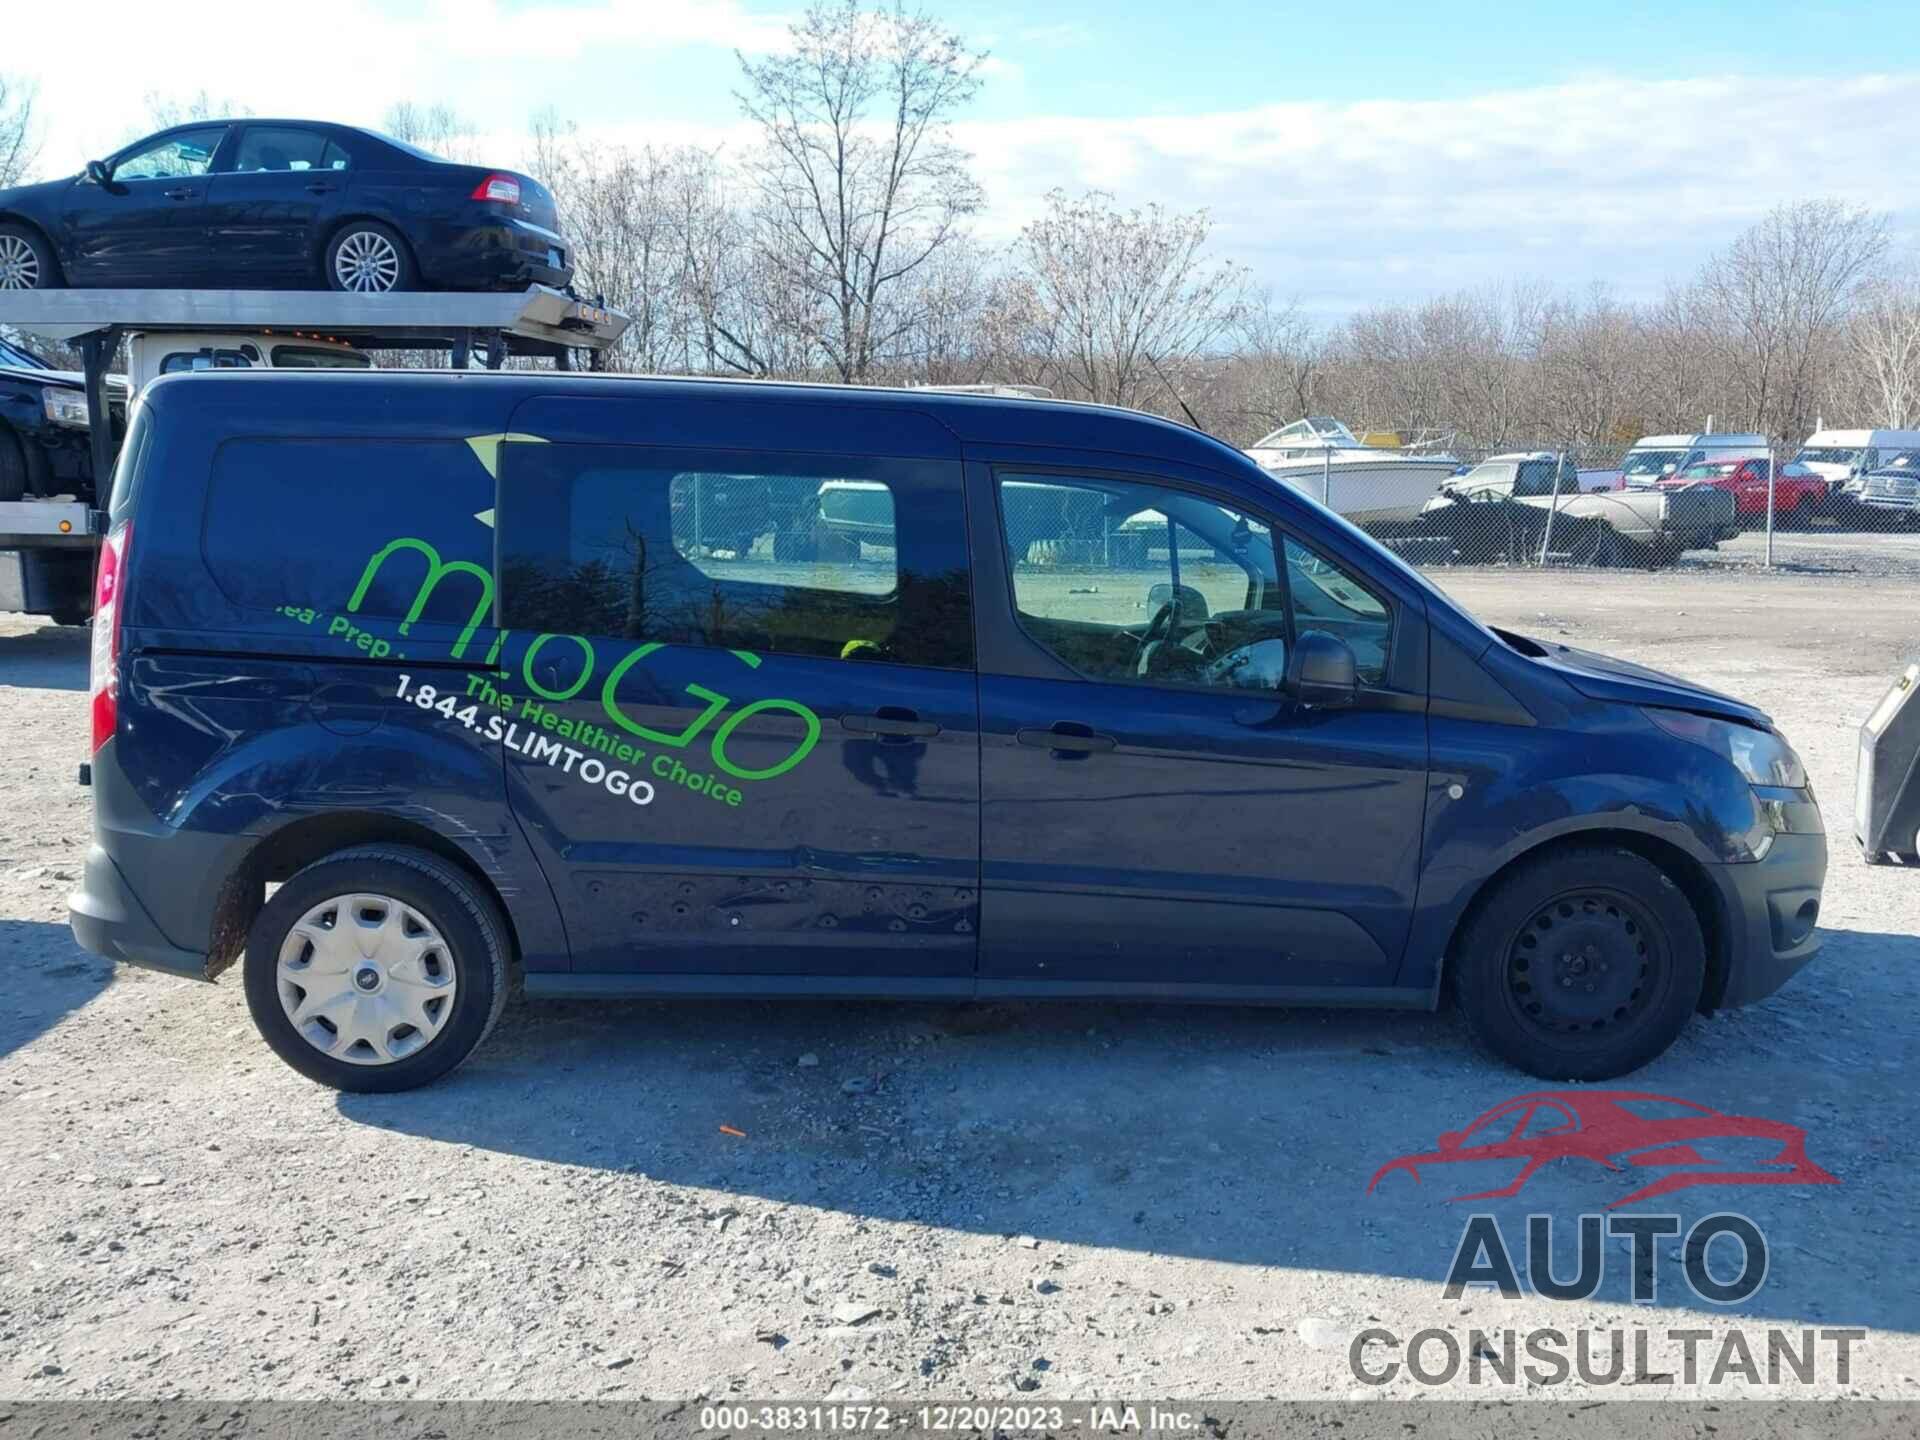 FORD TRANSIT CONNECT 2015 - NM0LS7E77F1228874